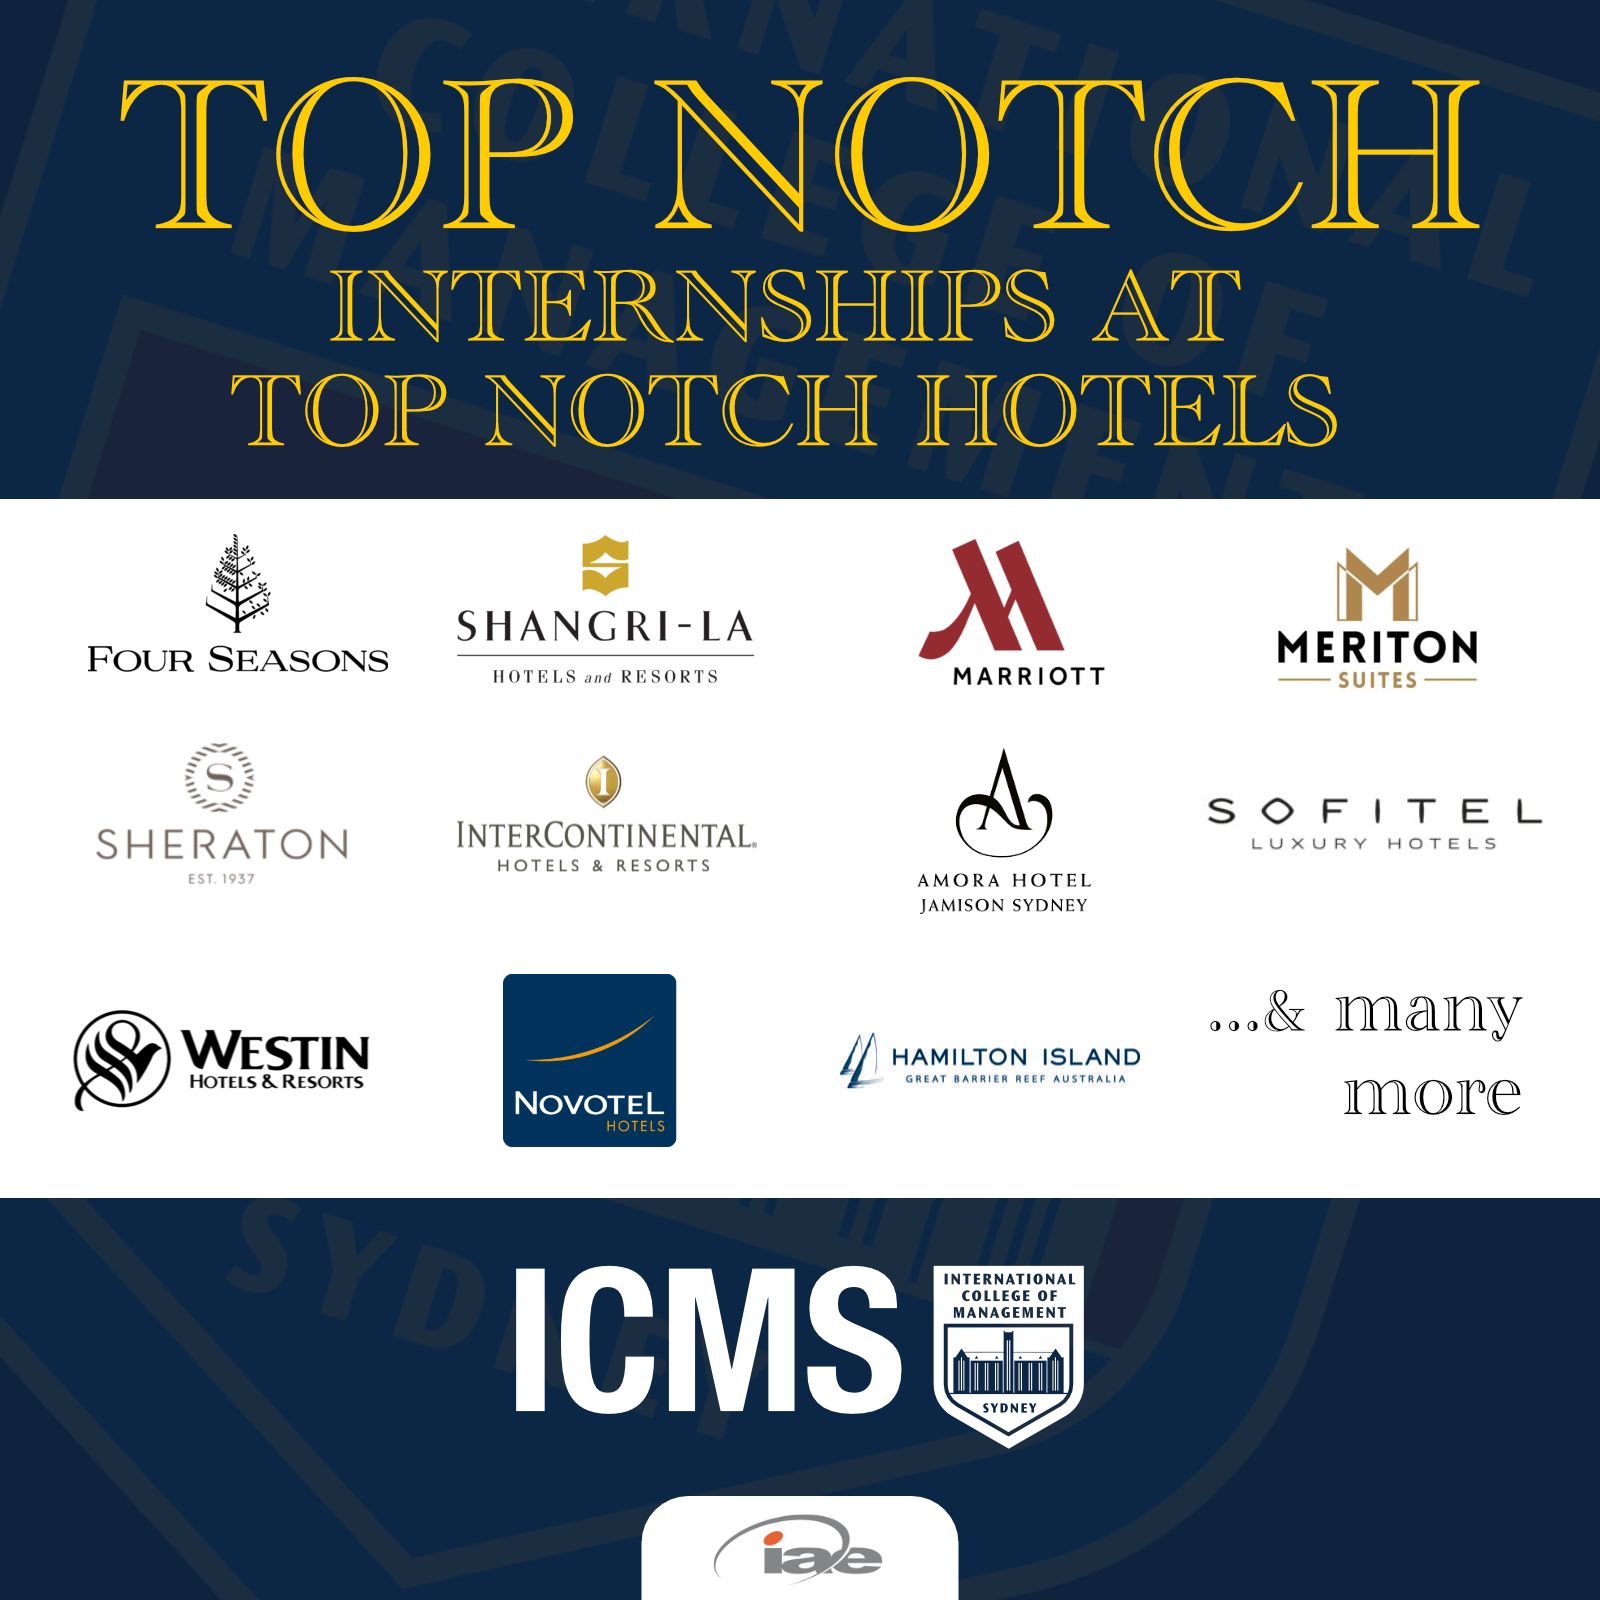 Earn placements into some of the best hotels and businesses when you do your Master's degree at ICMS, Sydney